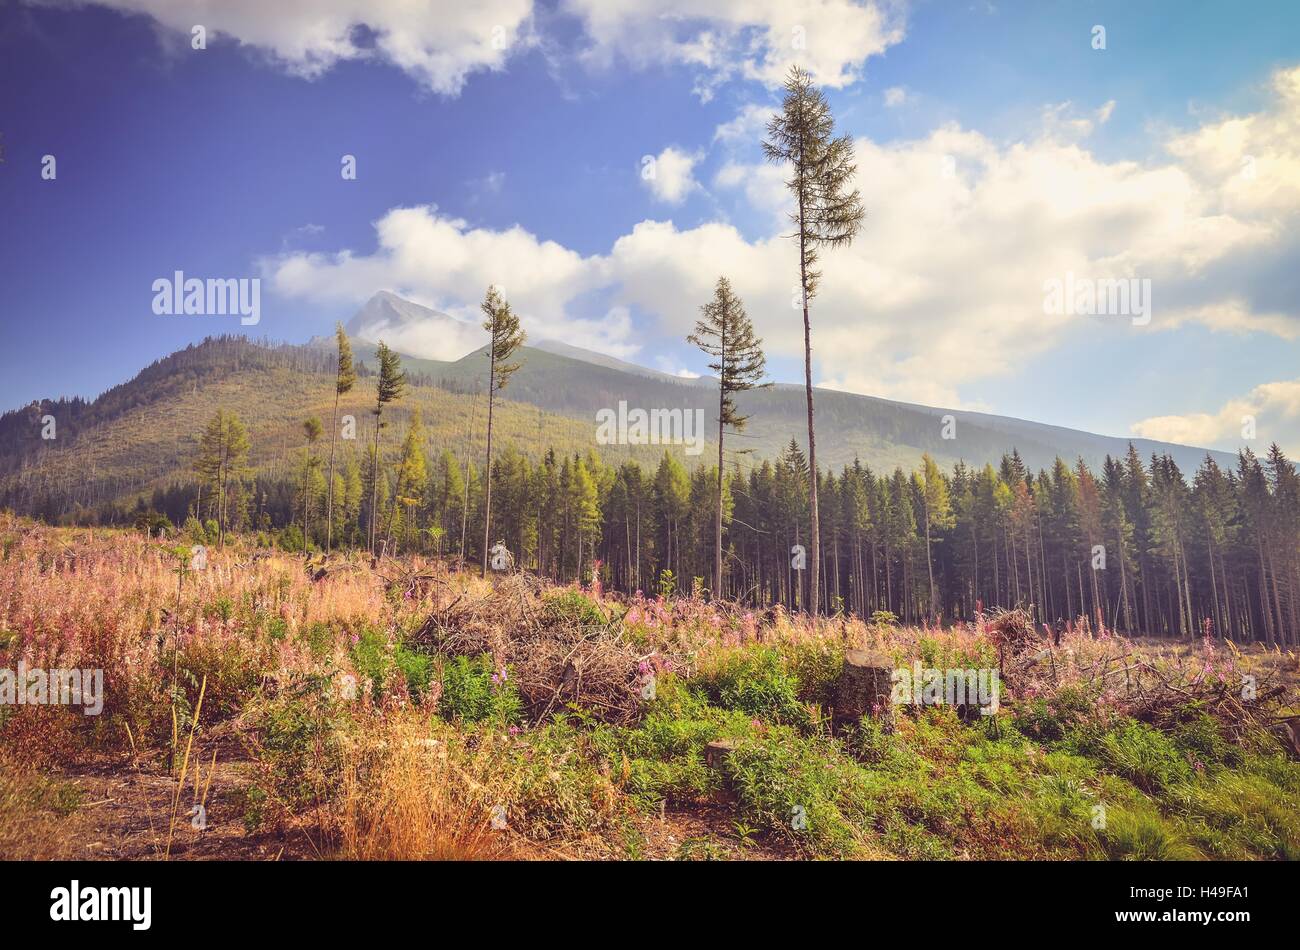 Summer mountain landscape. Beautiful view of trees and hills in High Tatra Mountains, Slovakia. Stock Photo